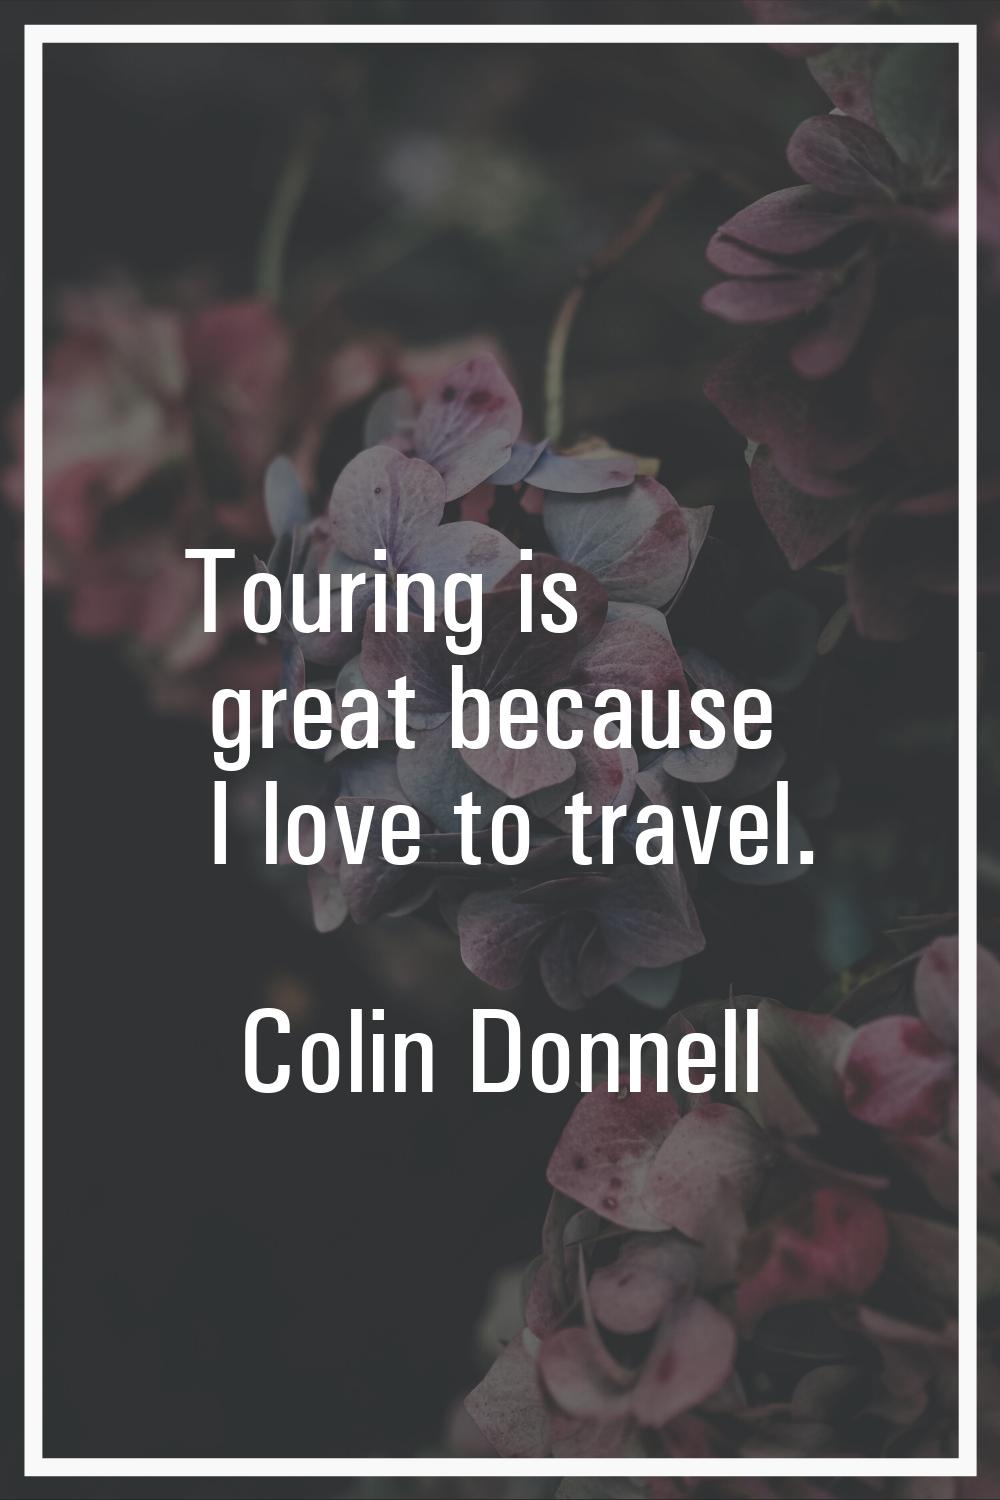 Touring is great because I love to travel.